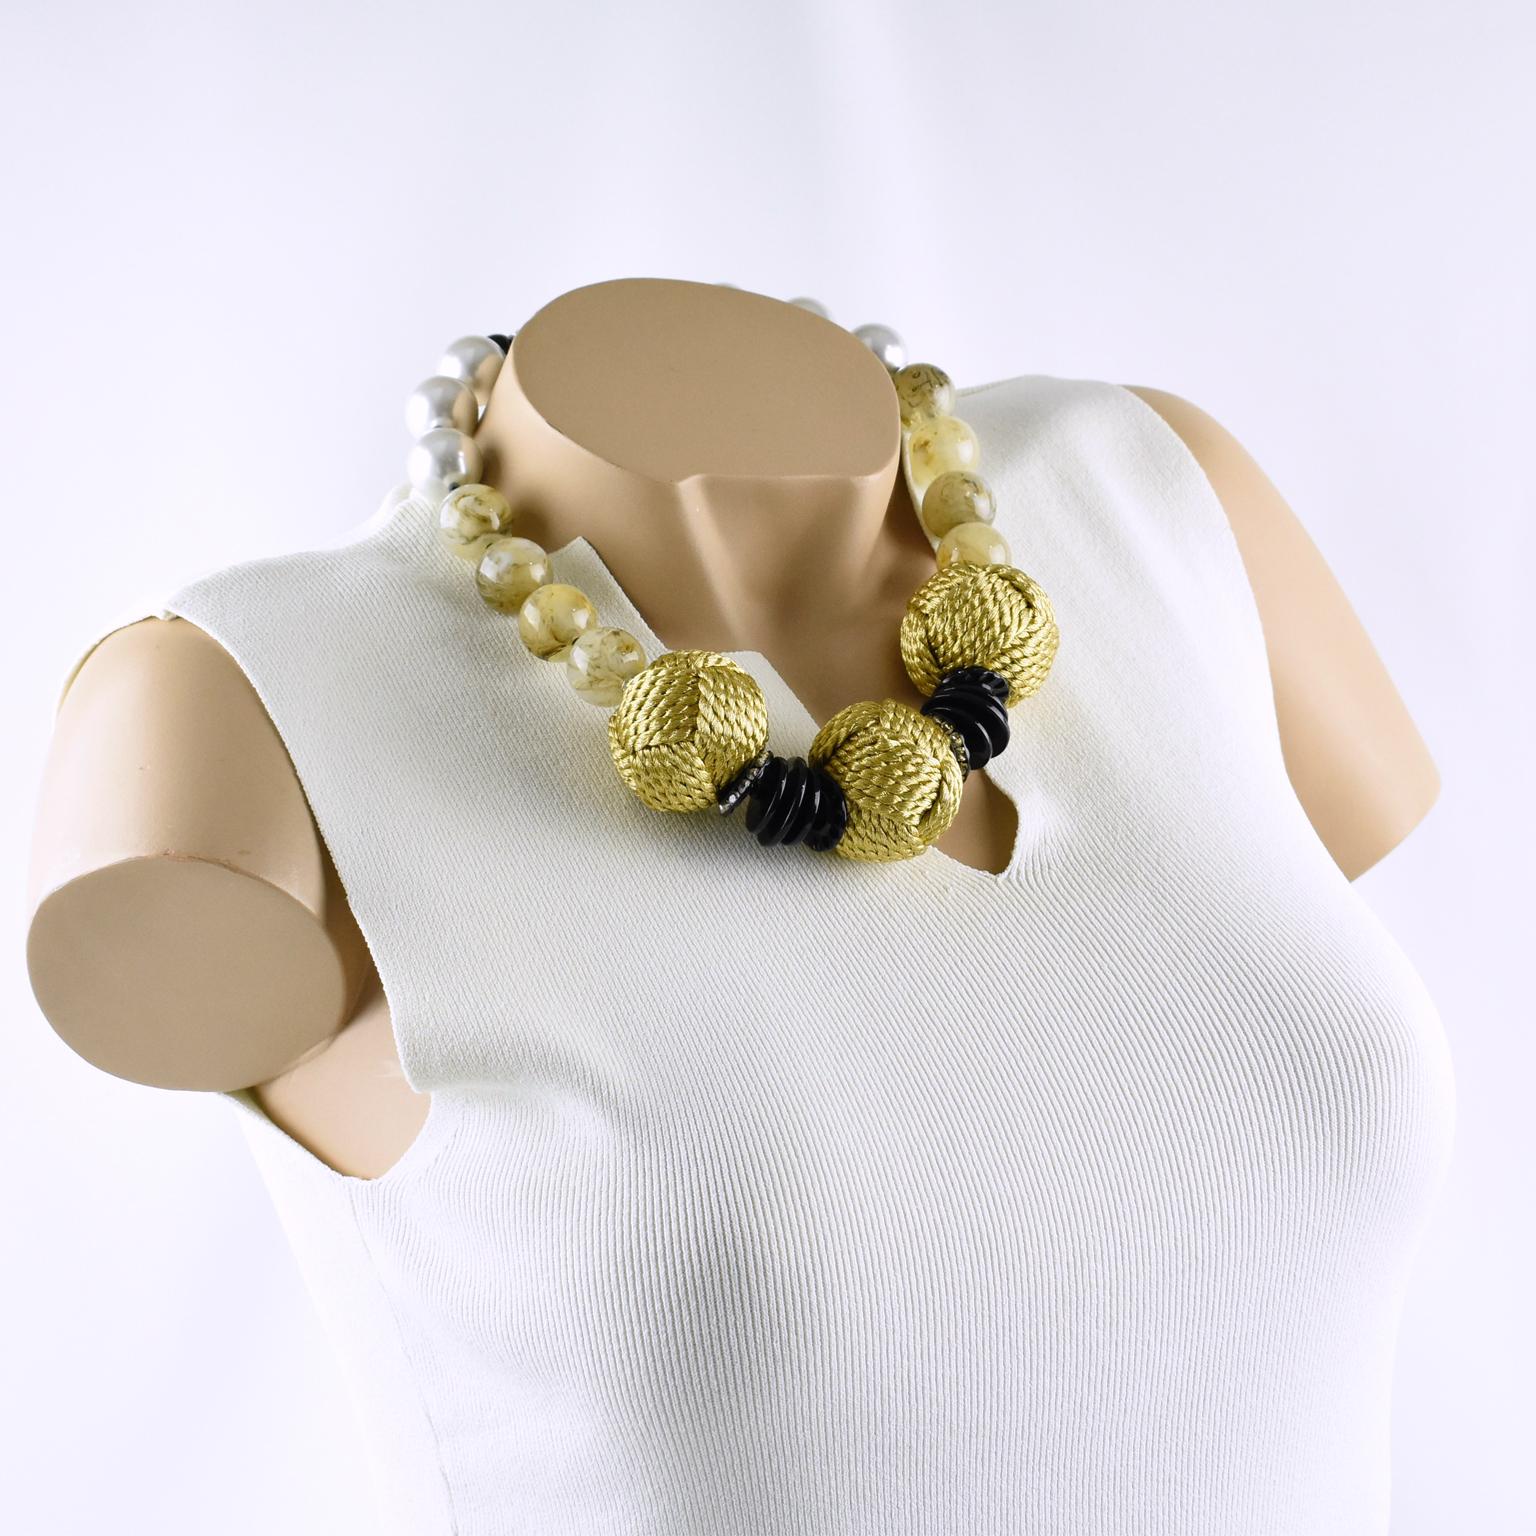 Lovely Angela Caputi, made in Italy choker beaded necklace. Large pearl imitation round beads with yellow smoked Lucite beads, compliment with extra large gilded braided thread beads. Her matching of colors is always extremely classy, perfect for